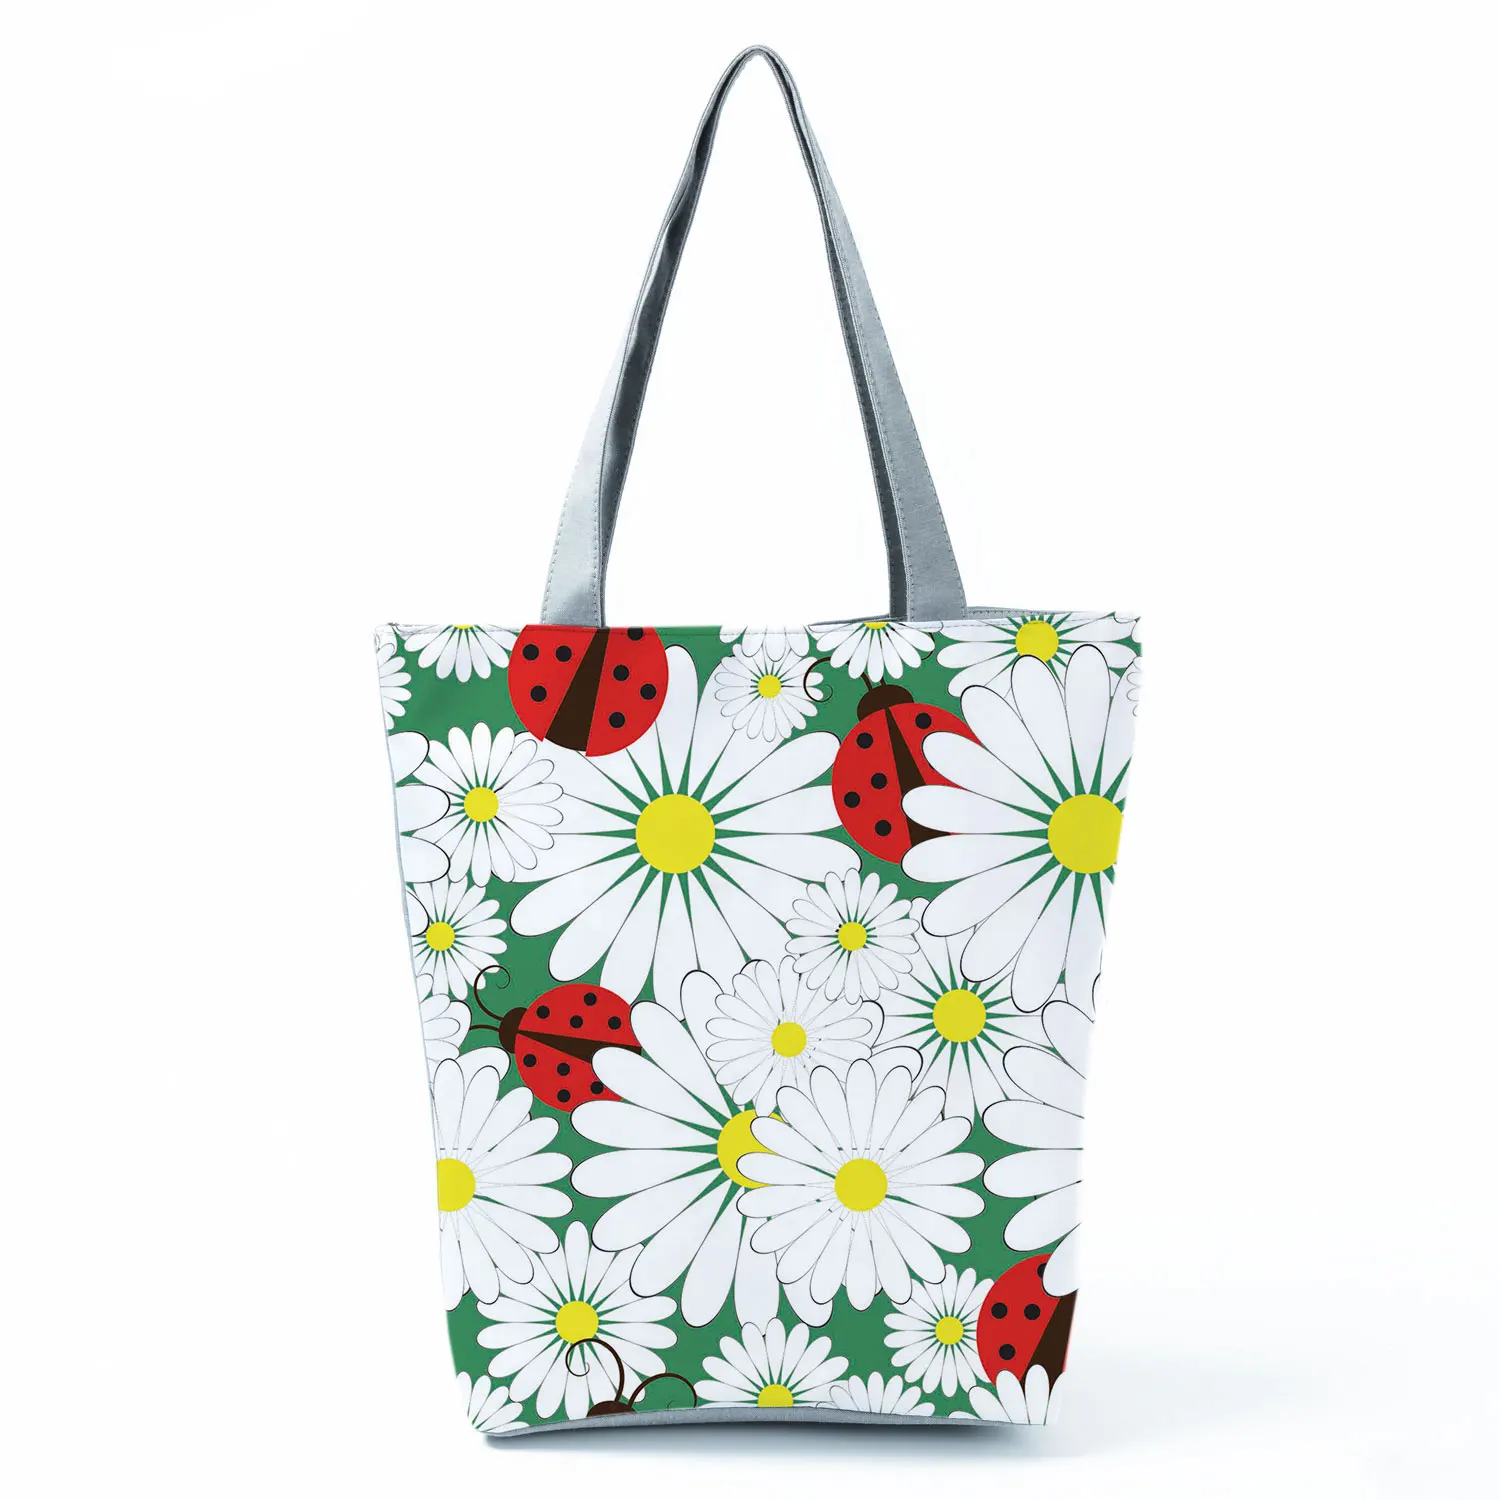 best Women's Bags 2021 New Fashion Tote Geometry Floral Print Handbags for Women High Quality All-Match Beach Bag Eco Friendly Portable Women Bags Women's Bags classic Totes